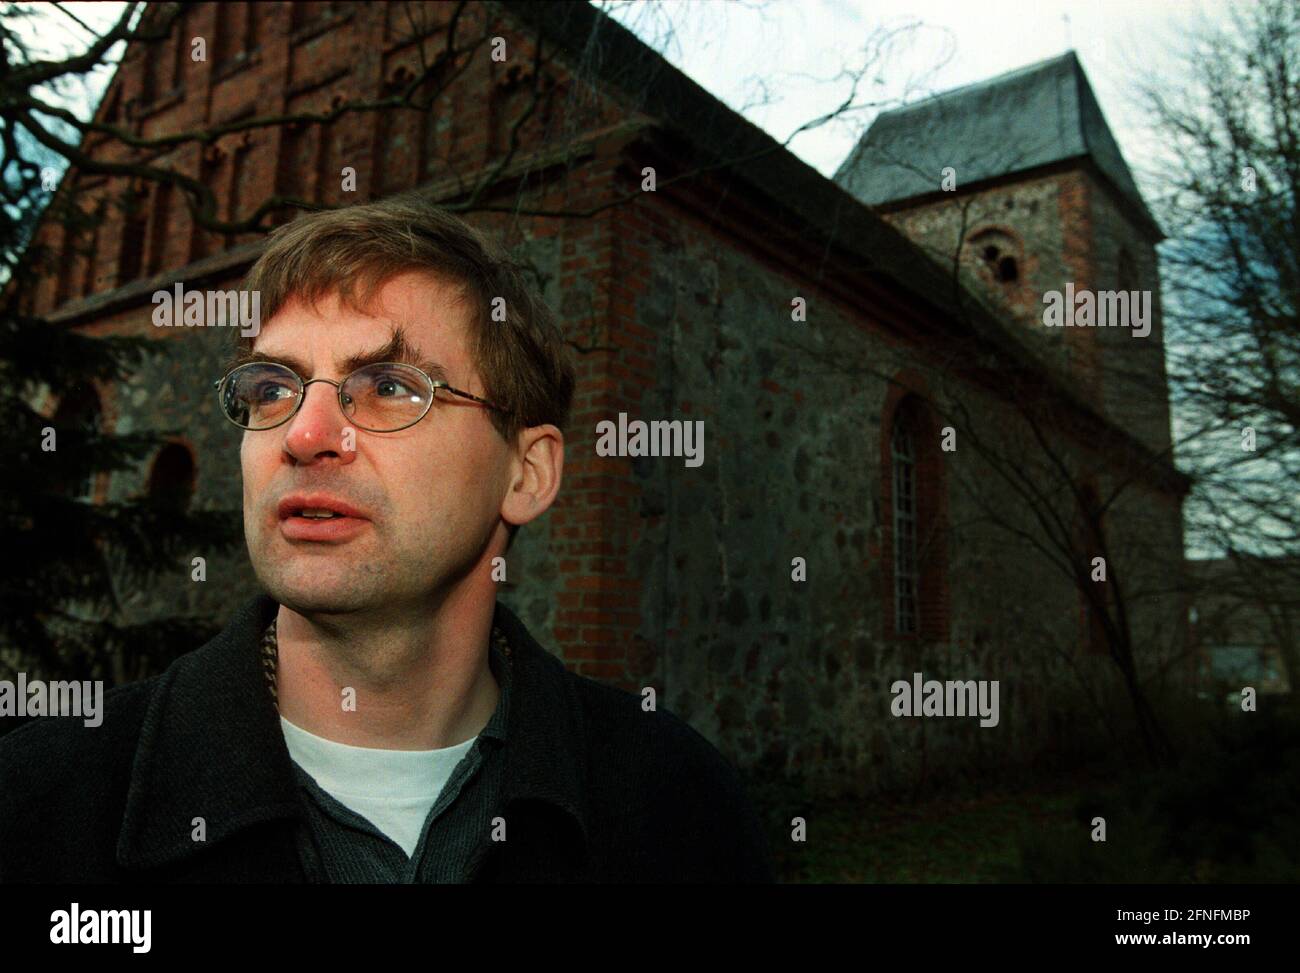 'Dorf Zechlin, DEU, 18.04.1997, Pastor Reinhard Lampe in front of his church in Dorf Zechlin, co-initiator of the citizens' movement ''FREIeHEIDe'' against the takeover of the former Soviet bombing range (Bombodrom) in the Ruppiner Heide by the Bundeswehr, [automated translation]' Stock Photo